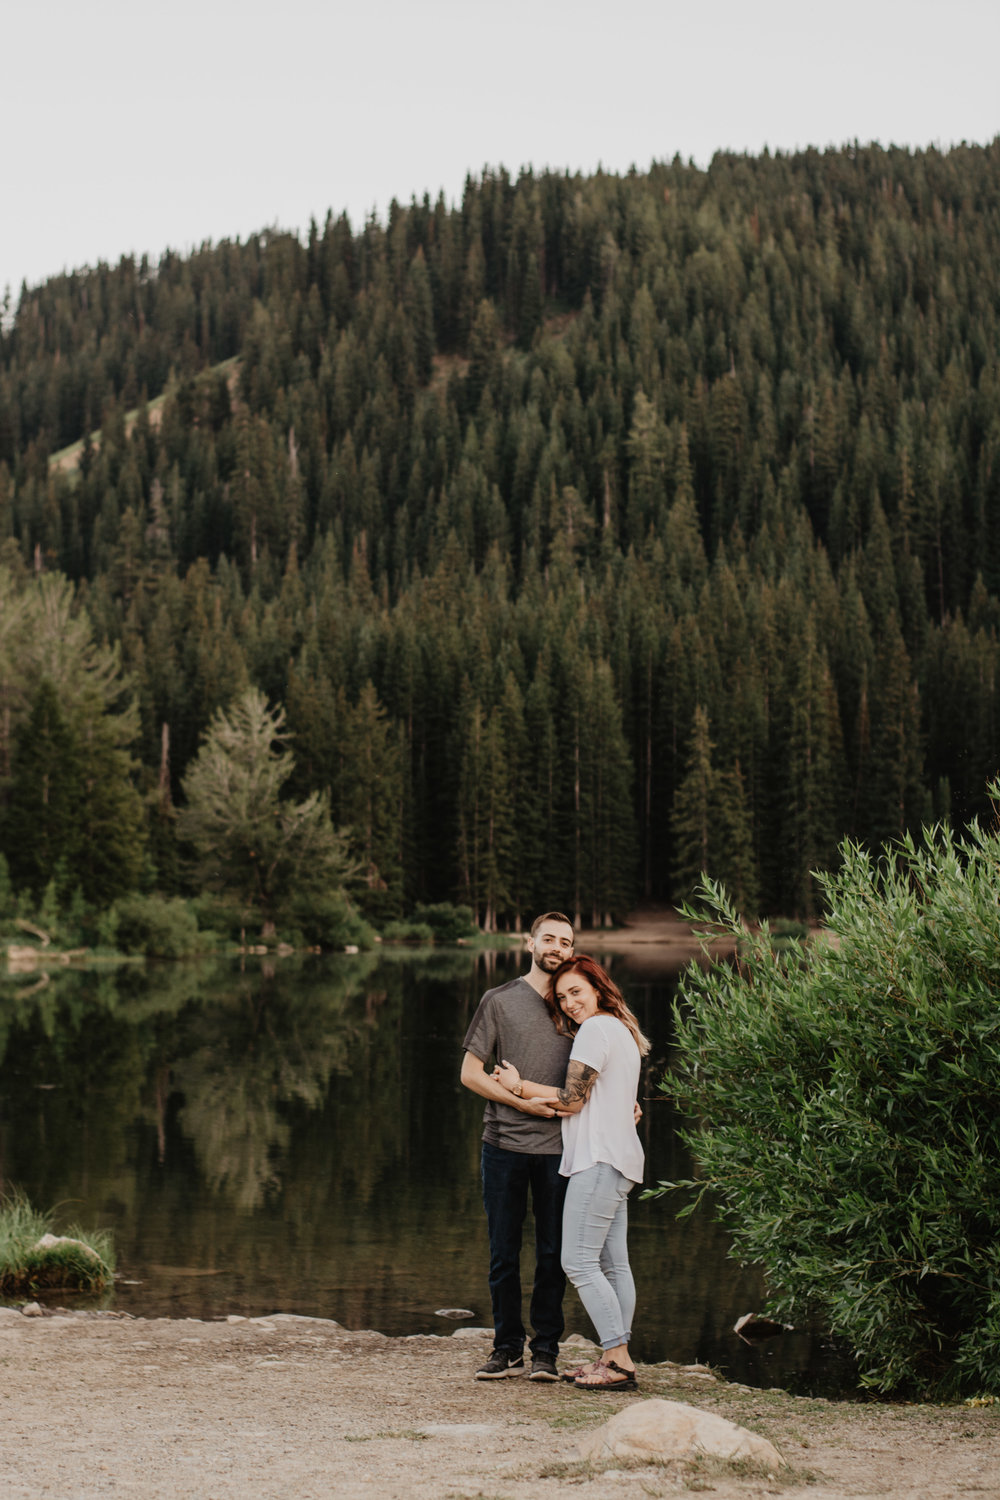 Jocilyn Bennett Photography | Engagement Pose Ideas | Destination Wedding Photographer | Elopement Wedding Photographer | National Park Elopement Photography | Capturing raw and genuine emotion | Utah Photographer | Utah wedding Photographer | National Park Weddings | Outfit ideas for engagements | Engagements with wild flowers| Adventure Photographer | What to wear guide for engagement | Mountain engagements | Location ideas for engagements | Logan Canyon, Utah | Tony Grove Lake |